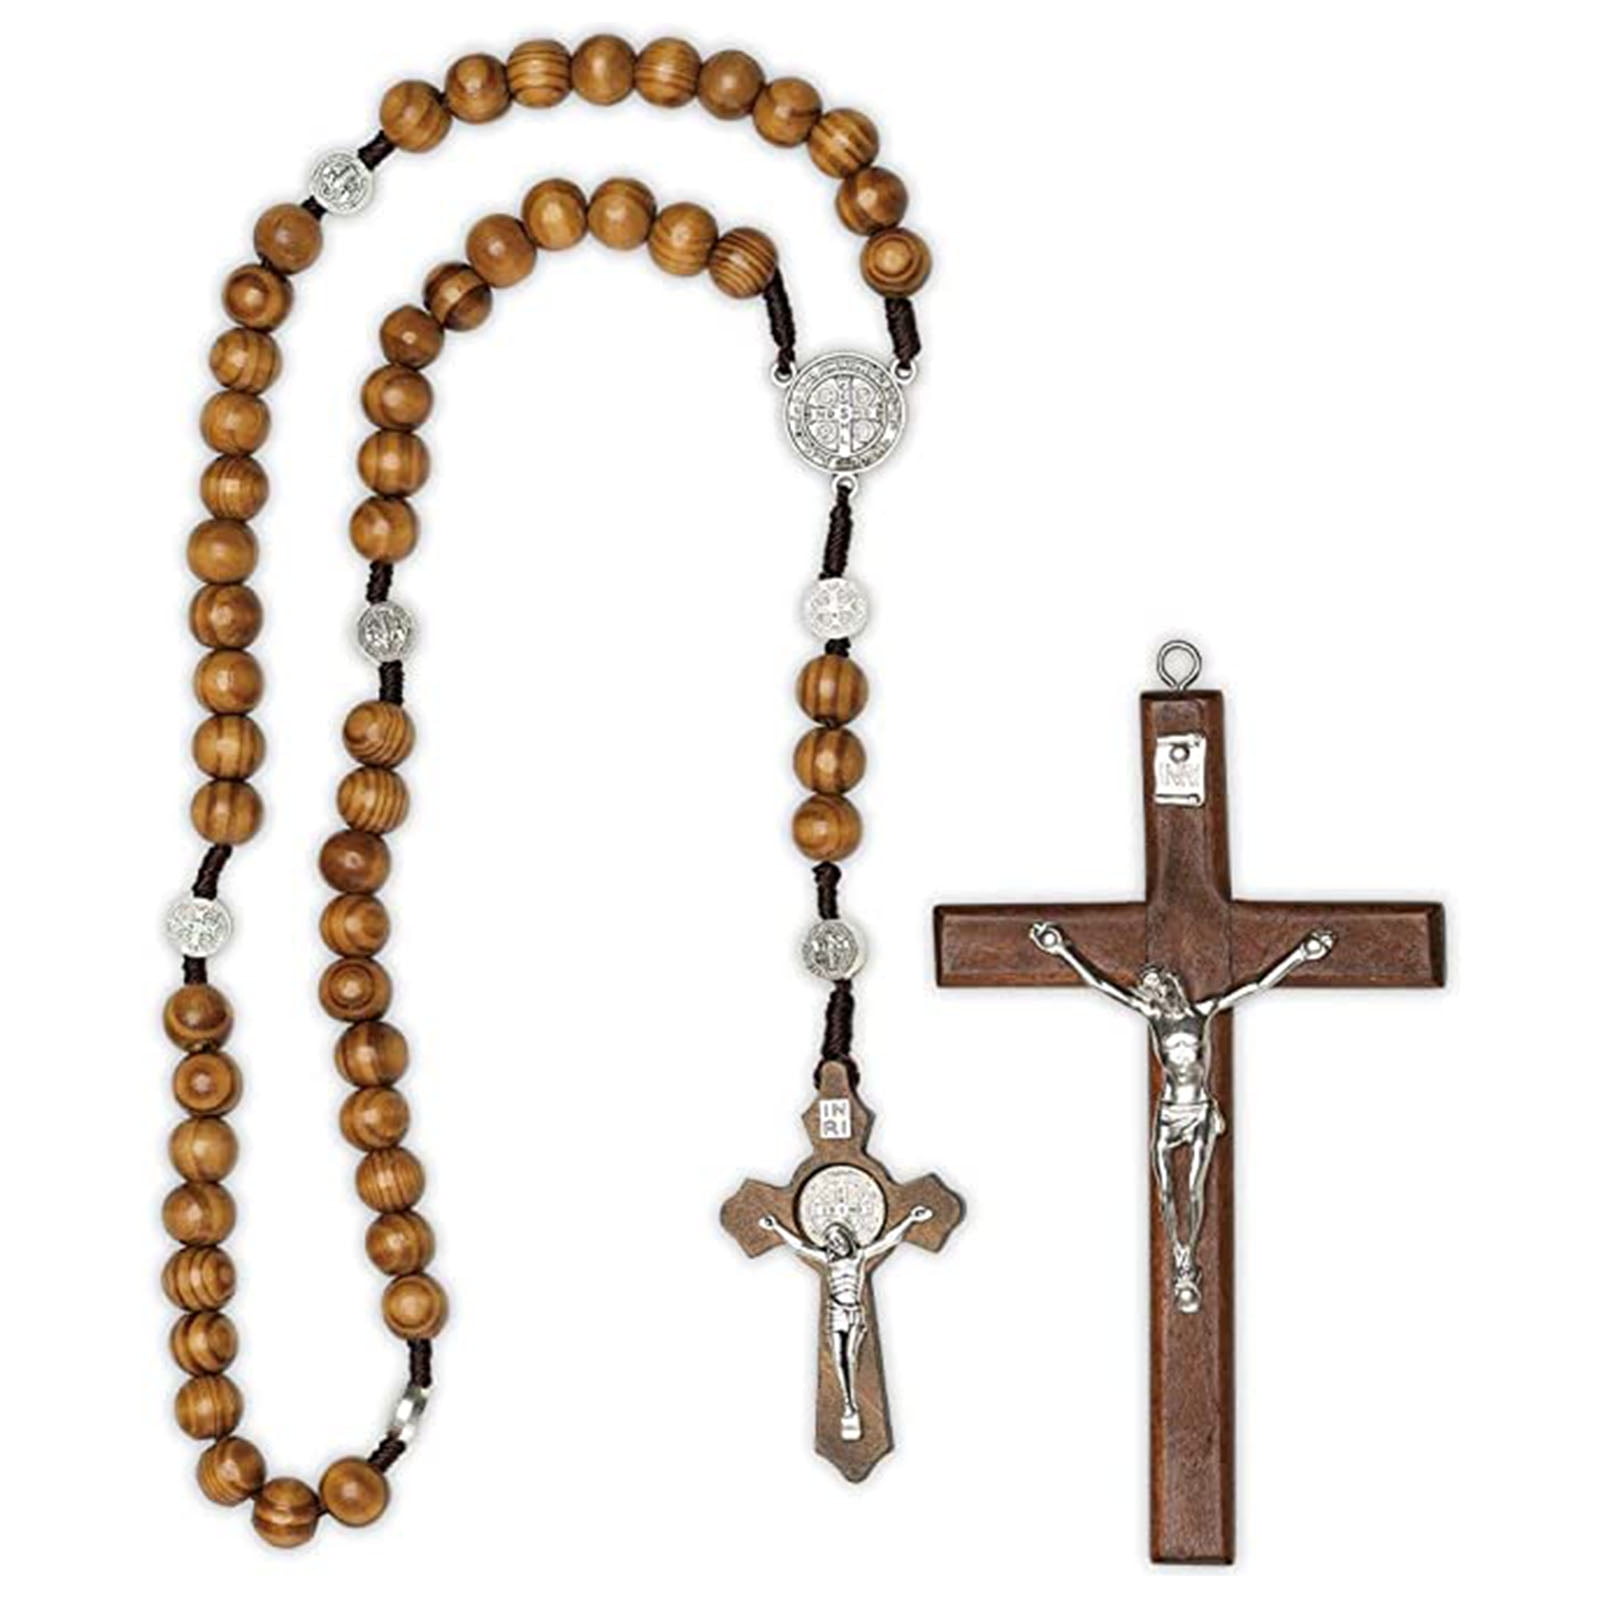 Amazon.com: Black Rosary 6mm Bead Chain With Jesus, Cross Coin Pendant  Religious Necklace Christ Jewelry: Clothing, Shoes & Jewelry